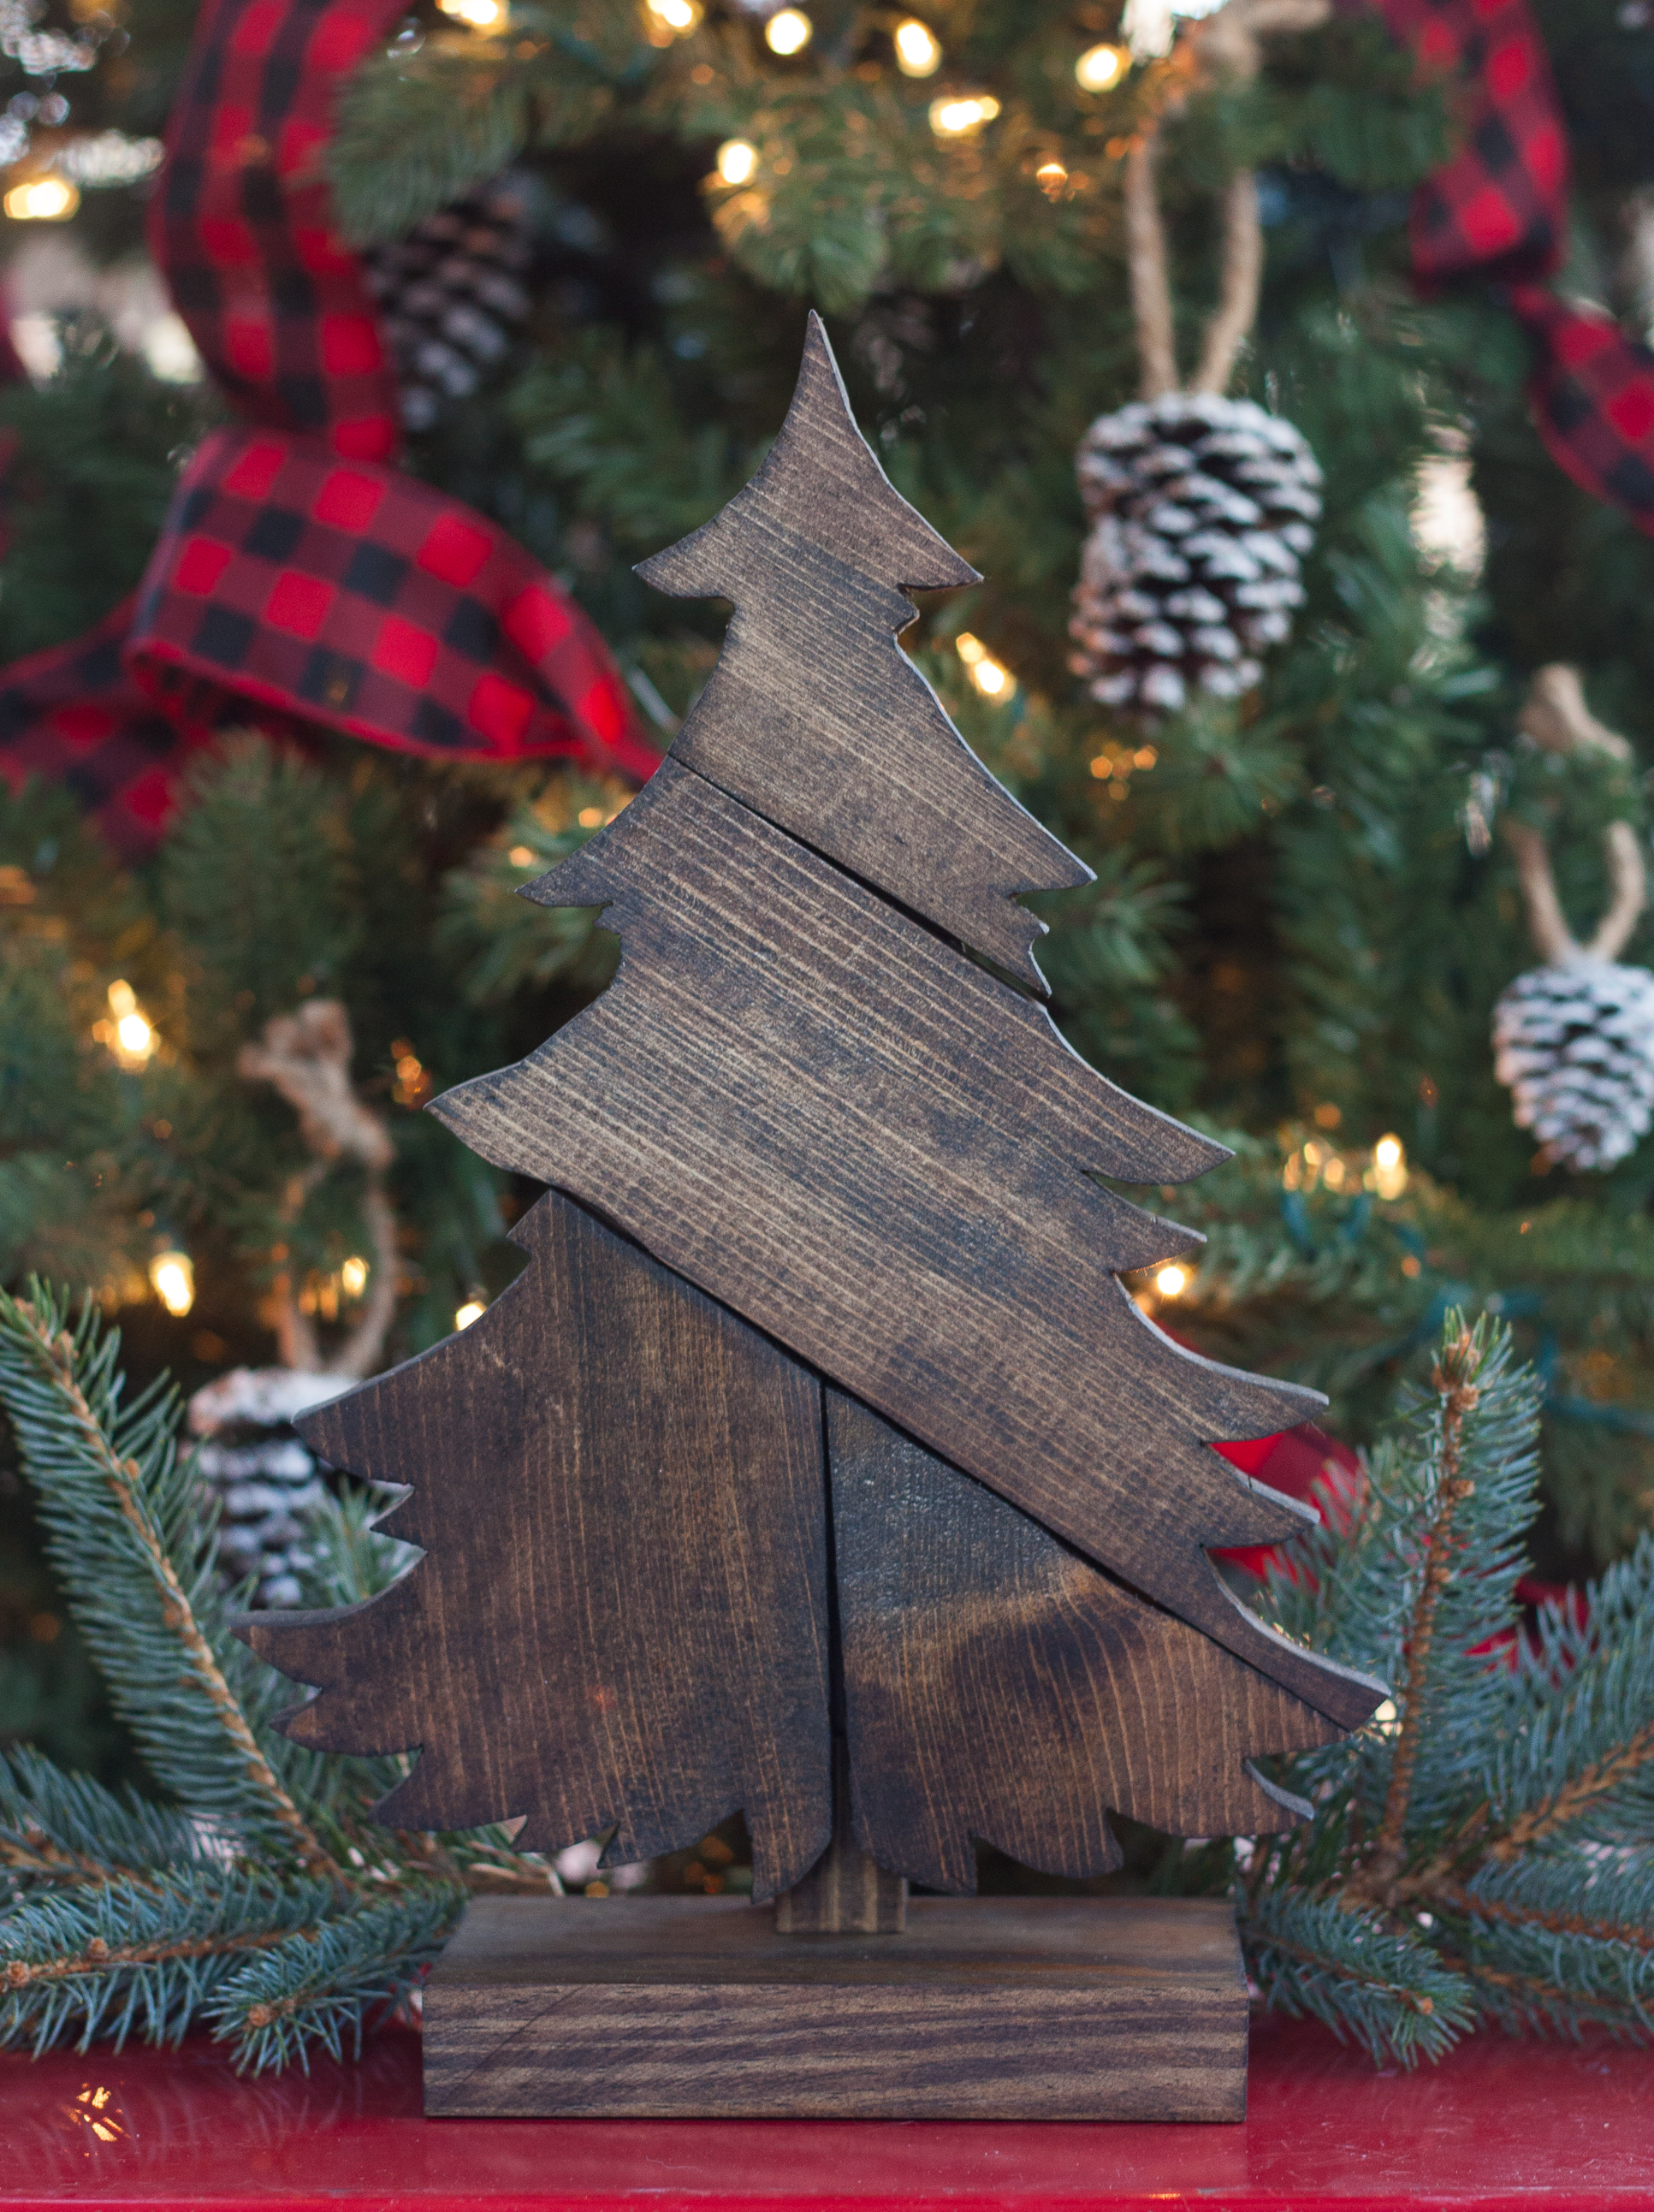 DIY Patchwork Wood Christmas Tree - Make this tree using scrap wood and customize with stain color. This project makes a great gift! #christmas #woodworking #christmasdecoration #christmascraft #DIYChristmas